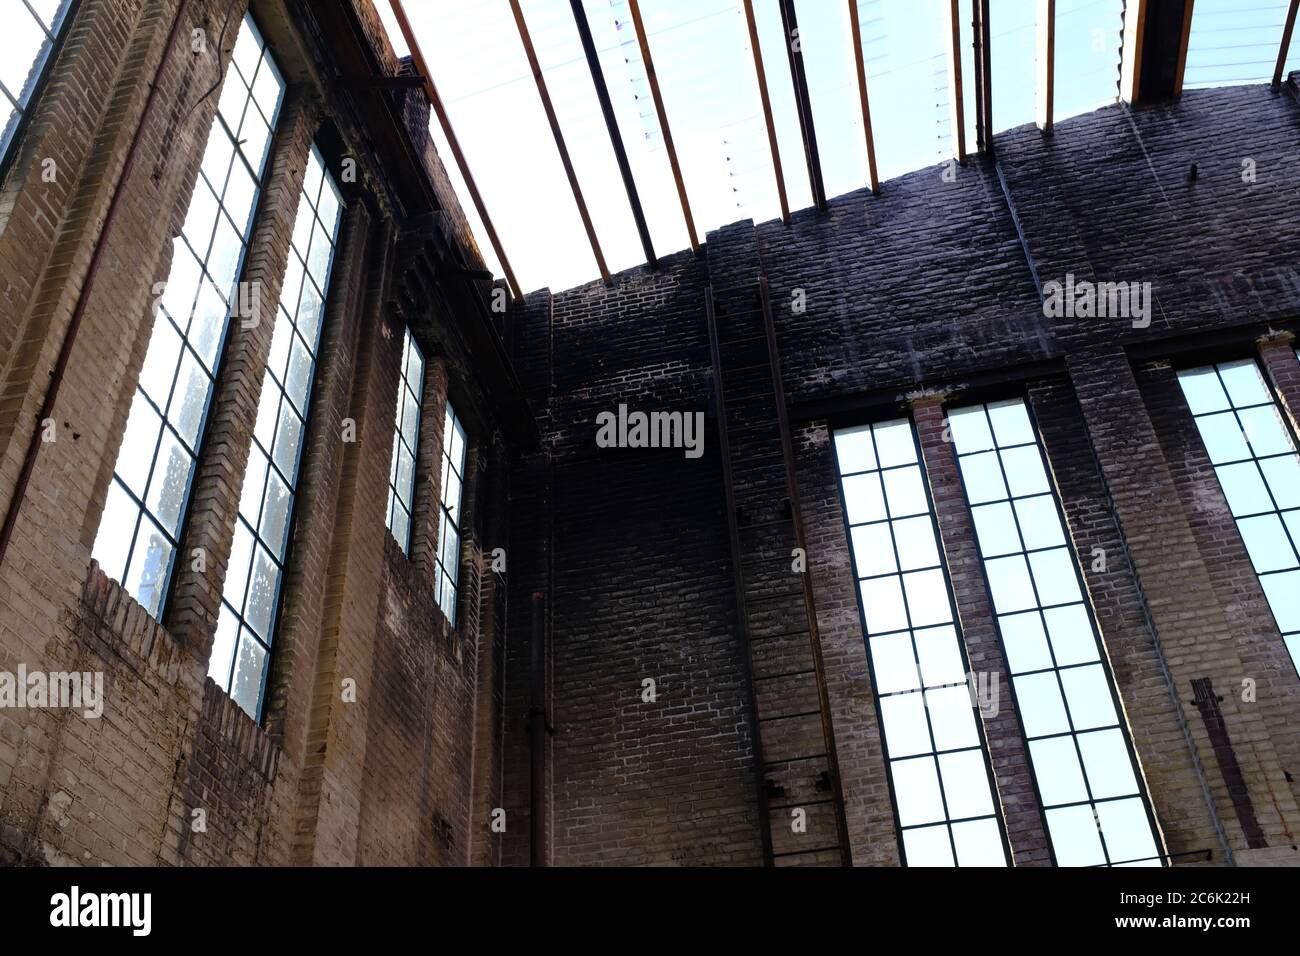 the interior of an abandoned industrial warehouse building on old industrial park called Hembrug in the netherland Stock Photo